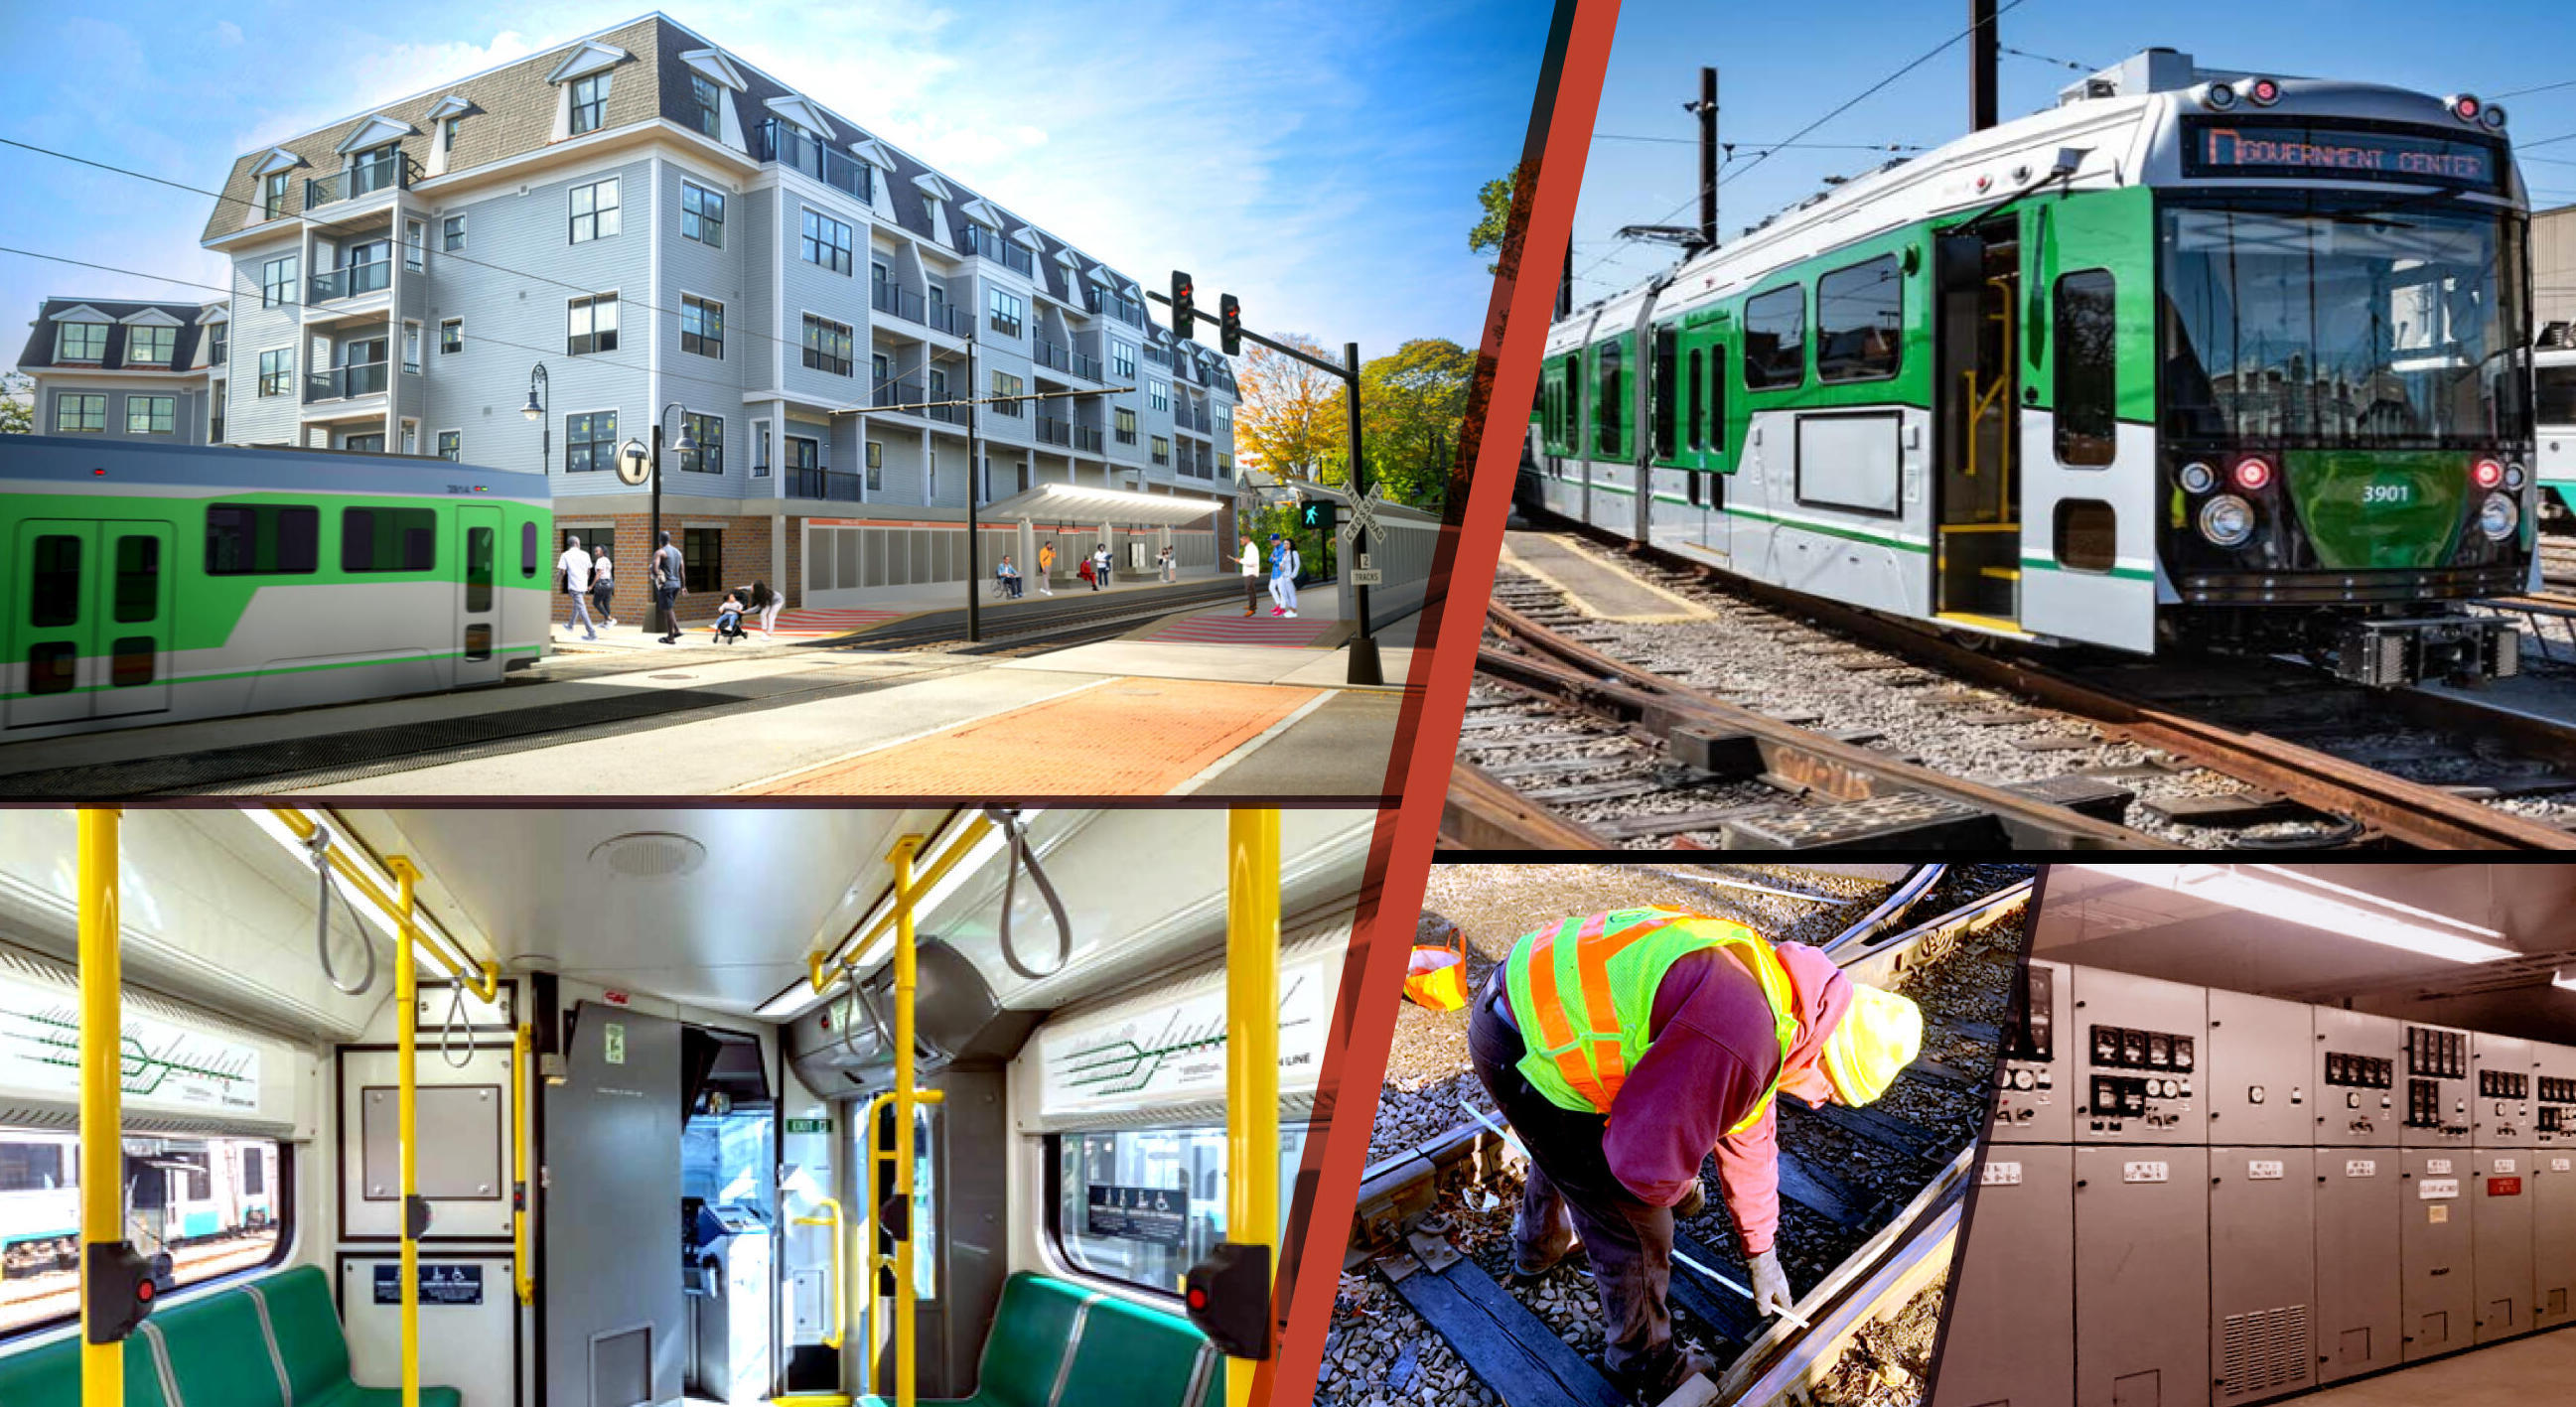 collage image of workers on tracks, green line train, and new building